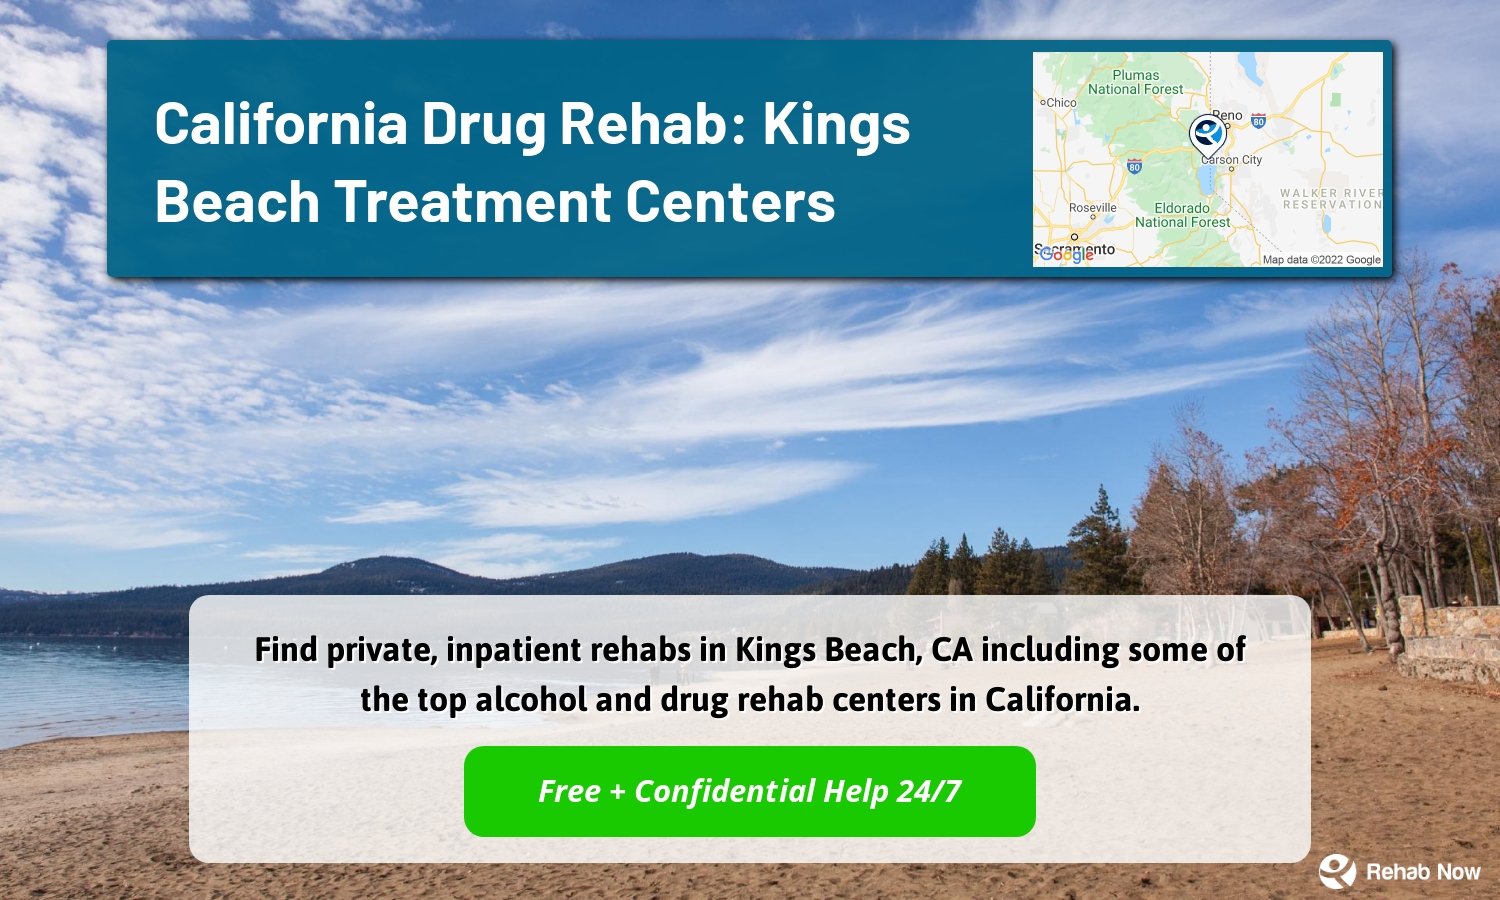 Find private, inpatient rehabs in Kings Beach, CA including some of the top alcohol and drug rehab centers in California.